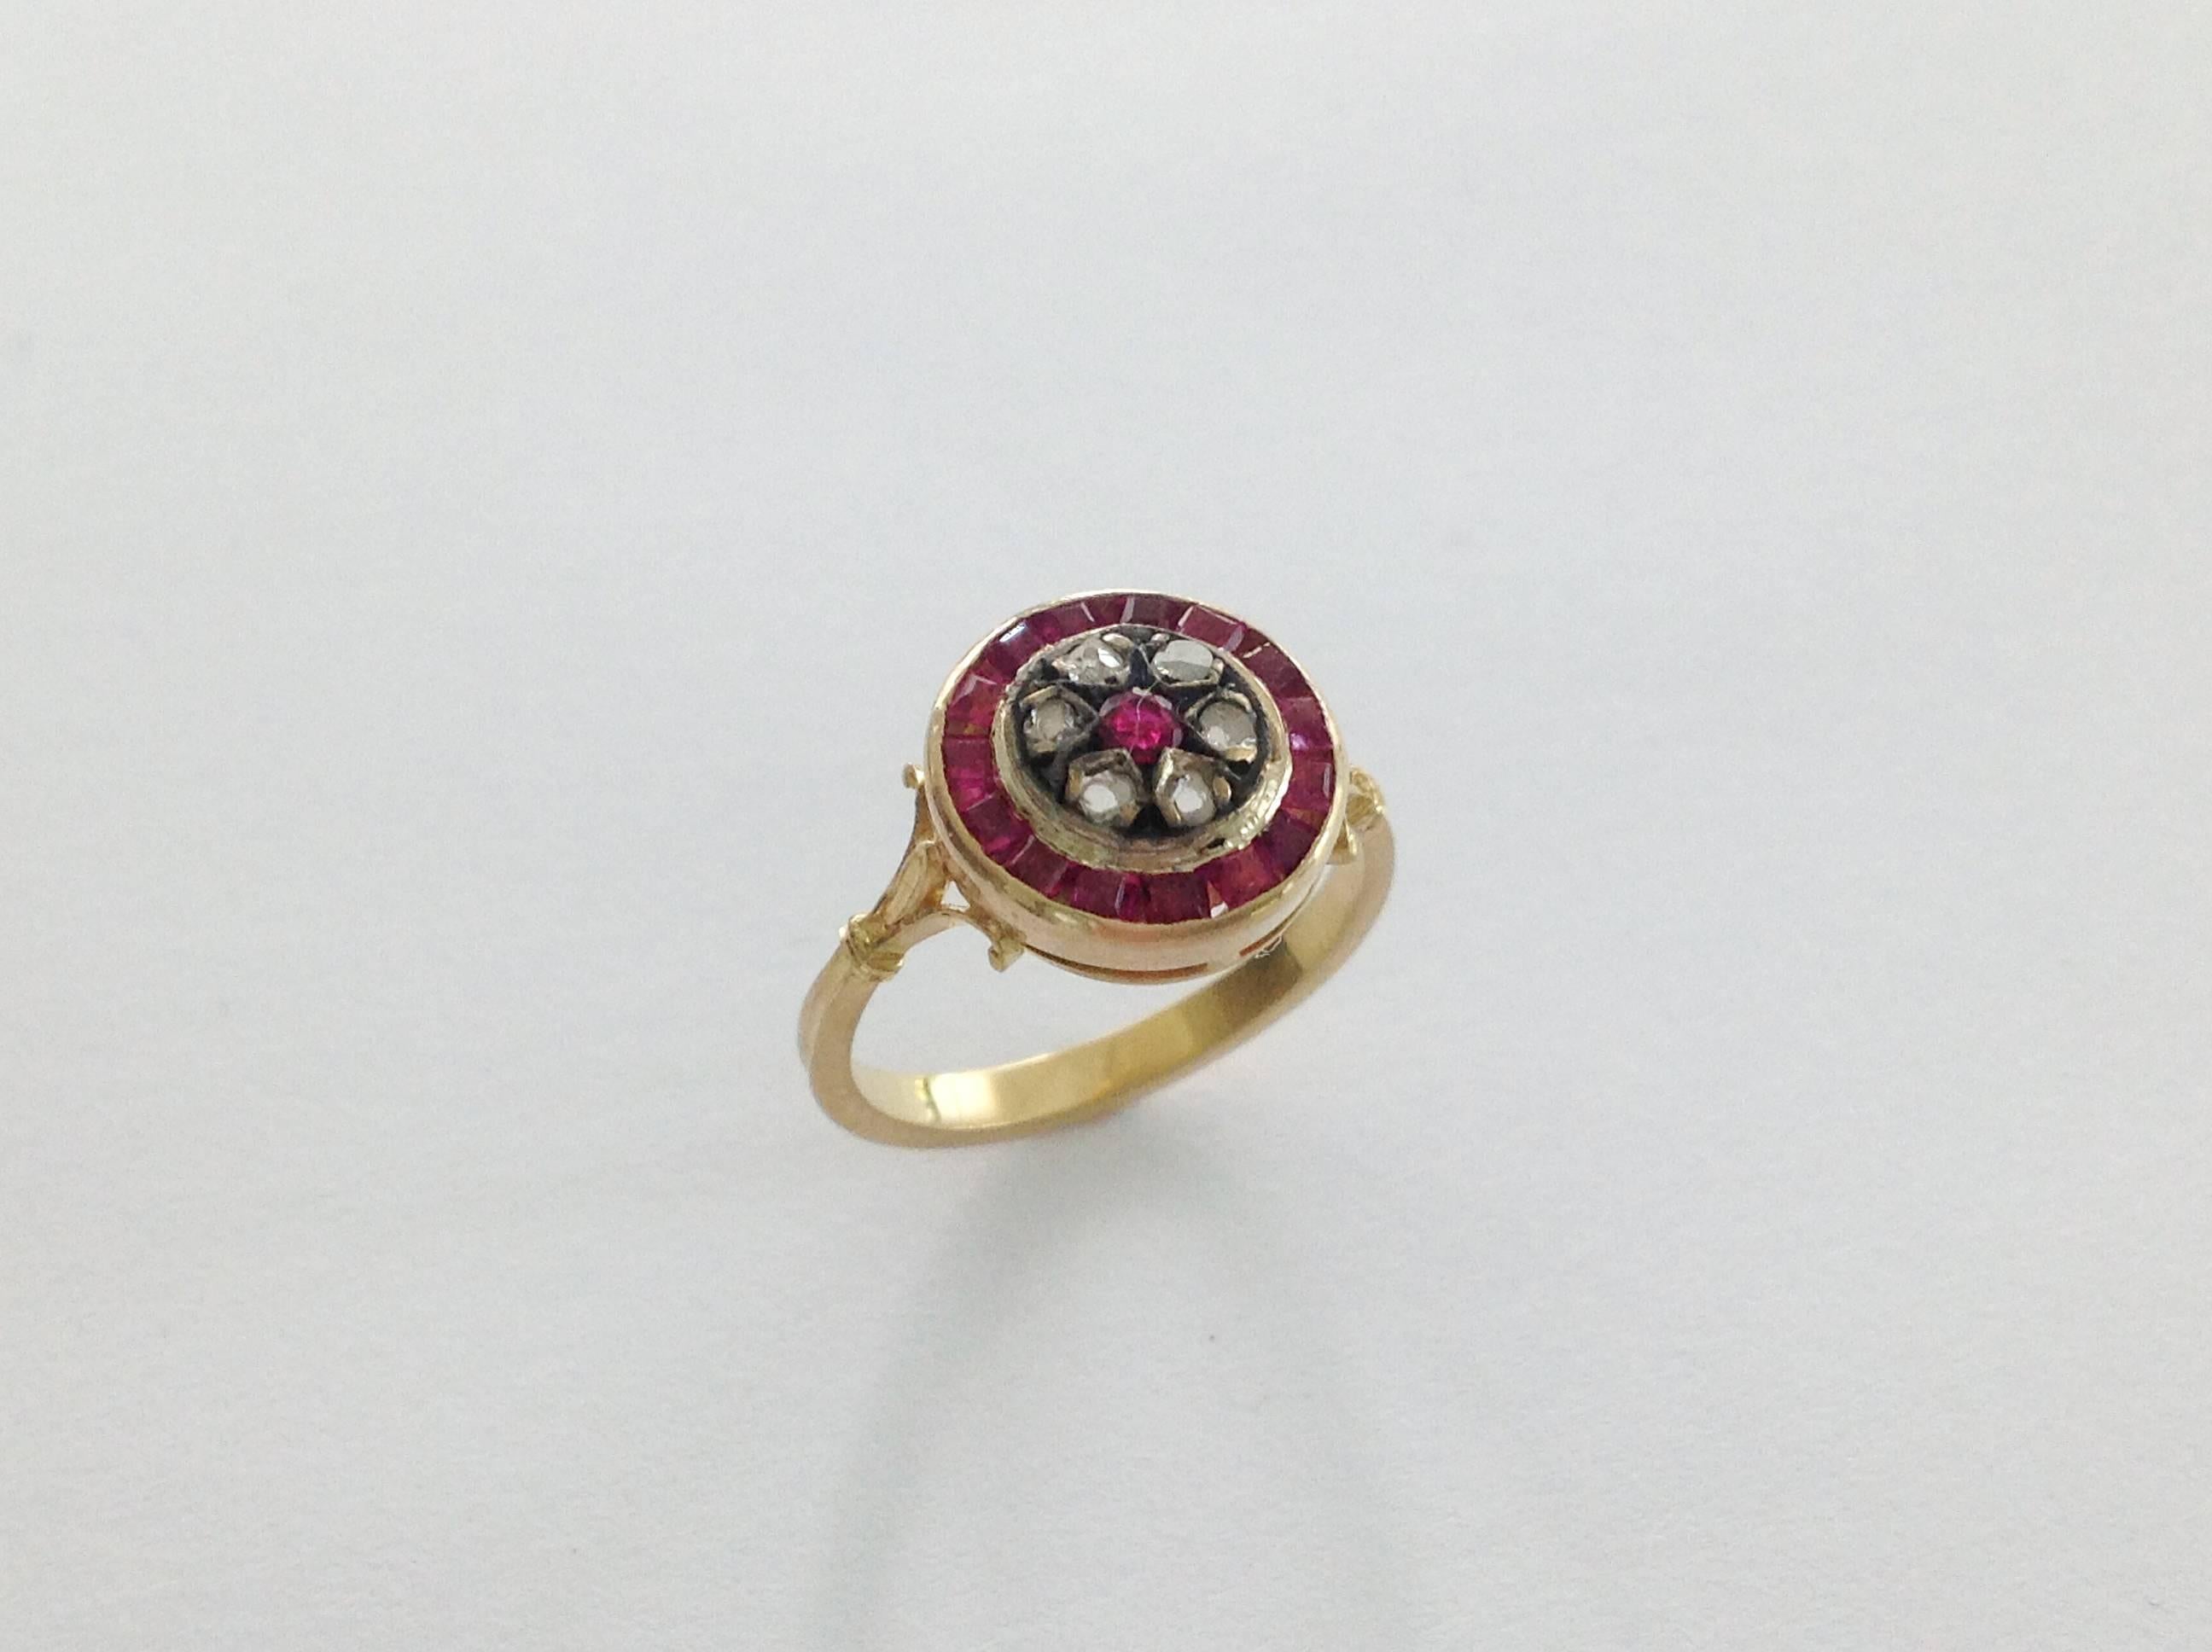 Ruby and rose cut diamond 18 k yellow gold and silver ring .
Circa 1920.
The ring shank has been completely restored.
Ring size 5 1/4 USA , 50 UE resizable